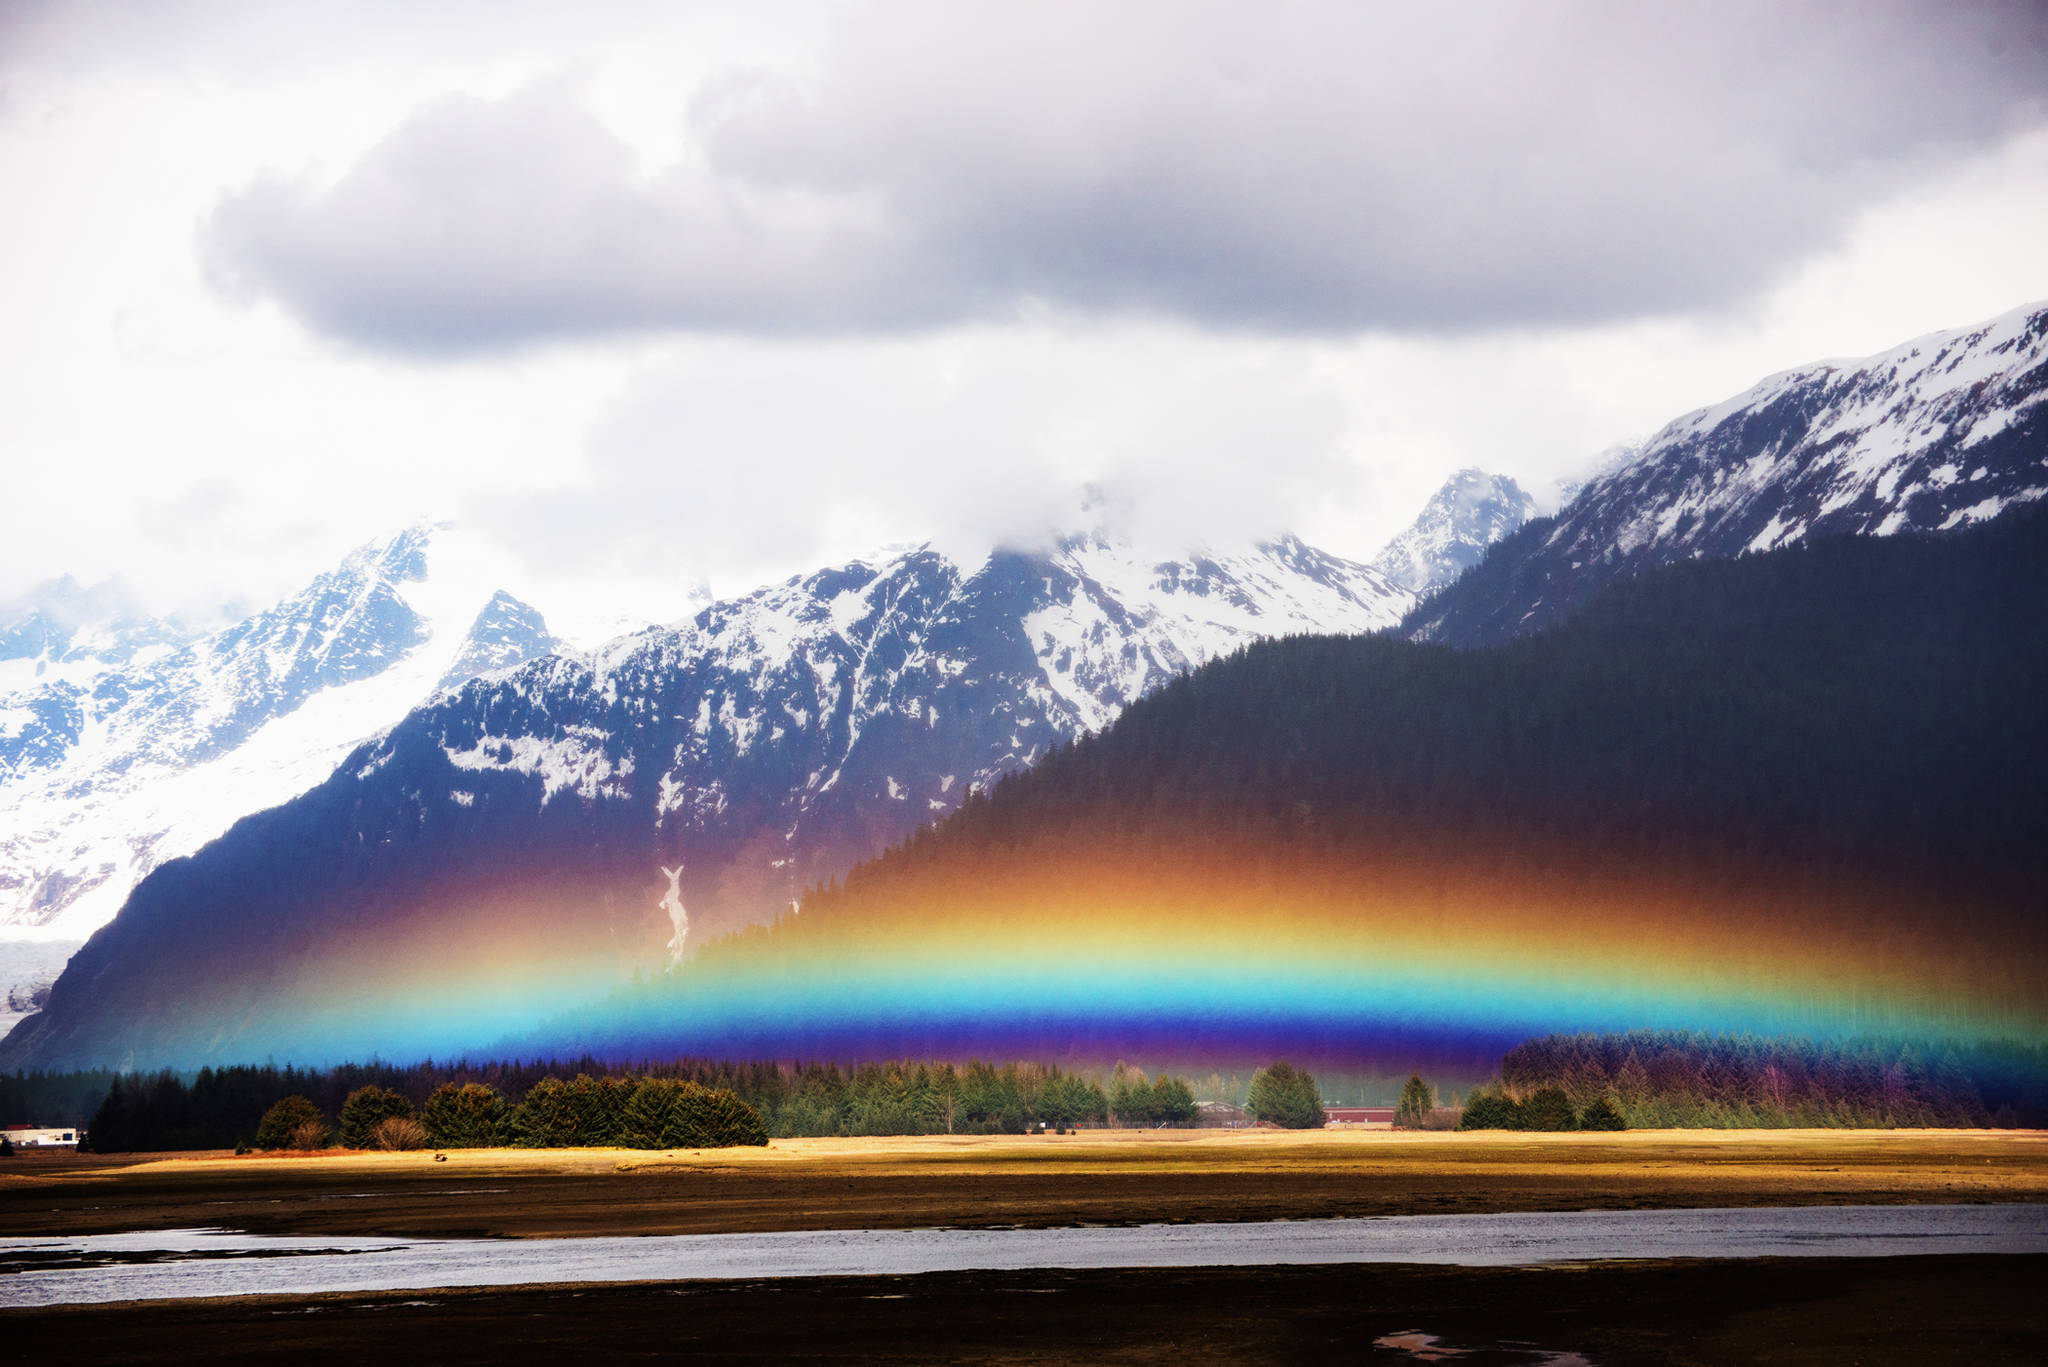 Uakoko rainbows are seen in the Gastineau Channel on Sunday. (Photo by Scott Spickler)